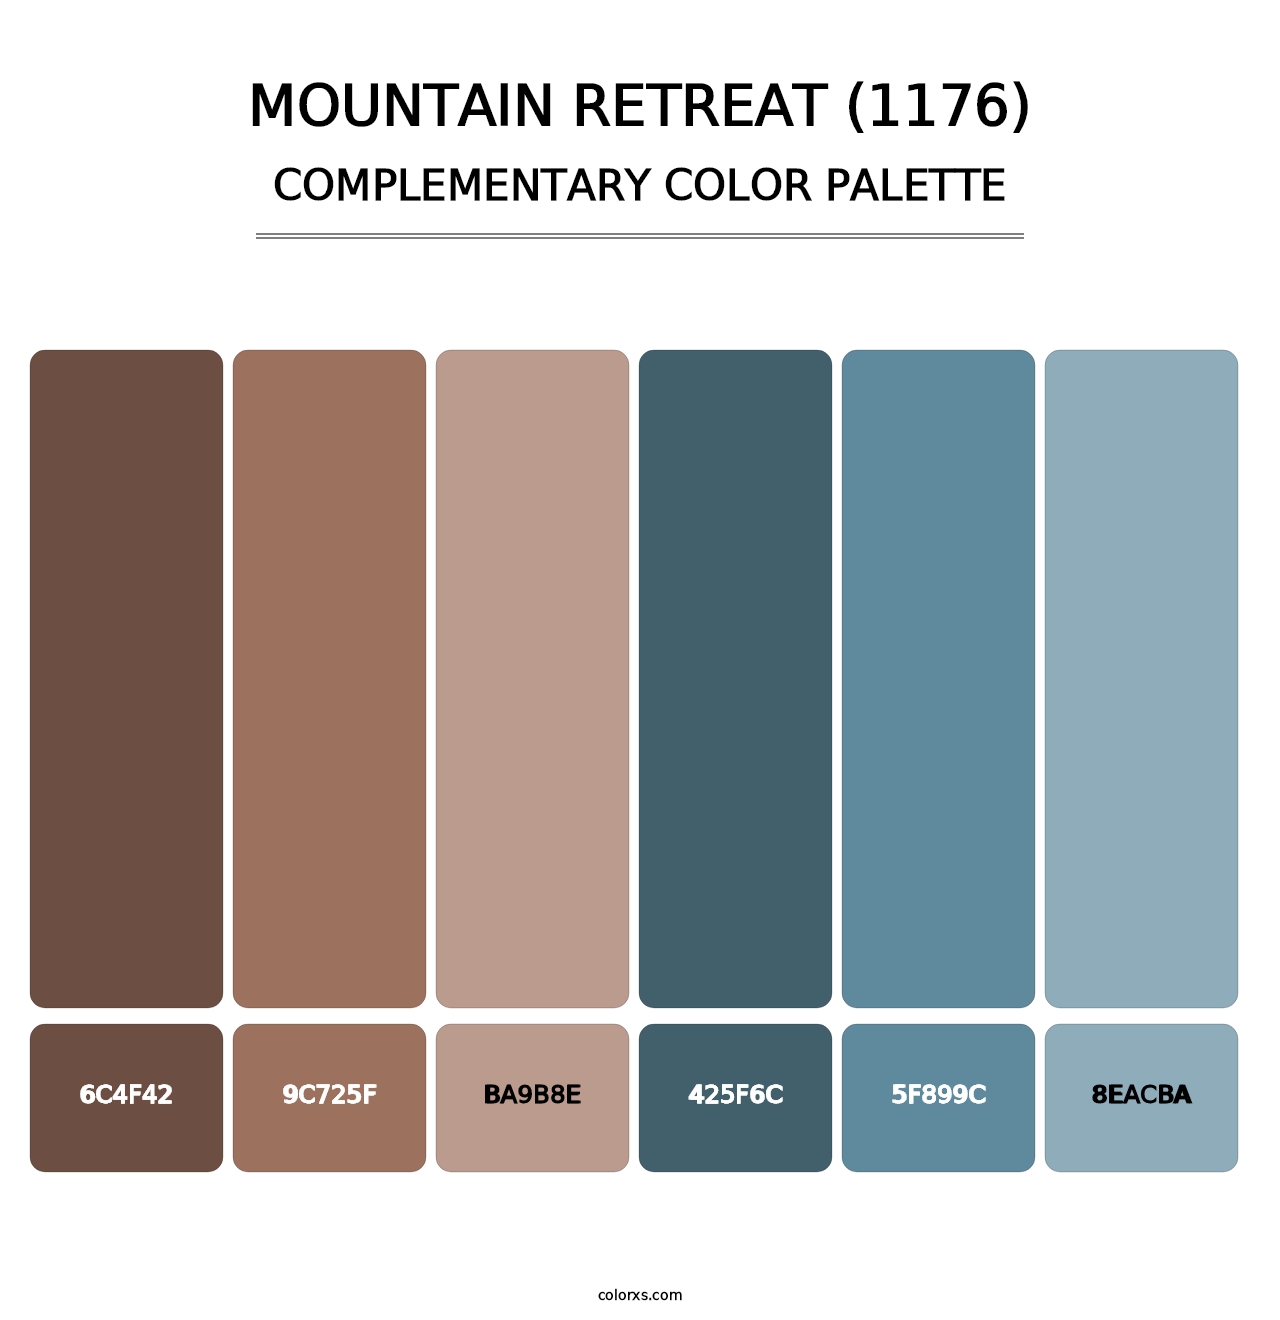 Mountain Retreat (1176) - Complementary Color Palette